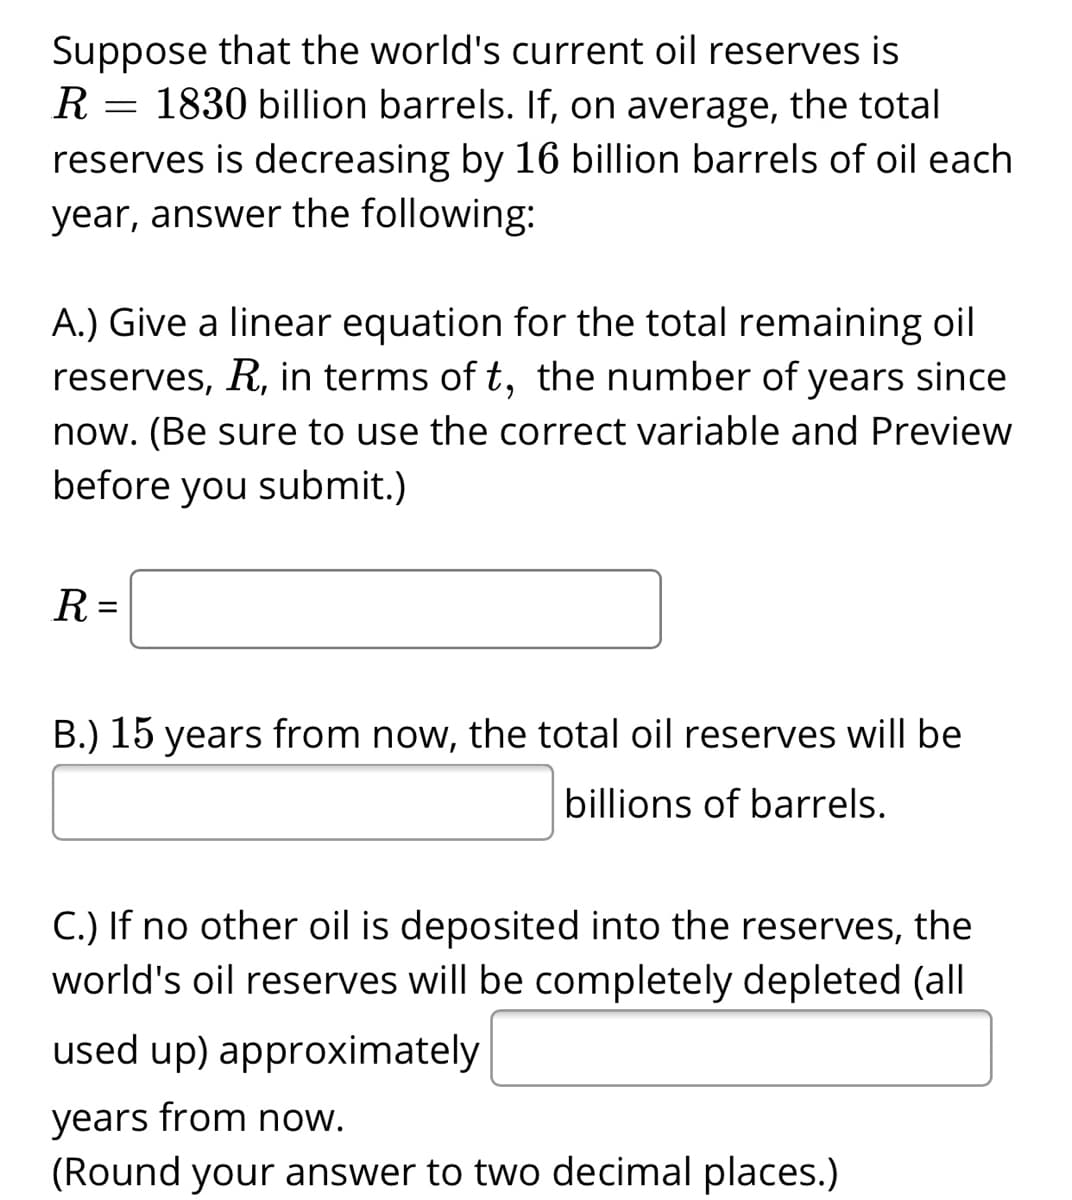 Suppose that the world's current oil reserves is
R = 1830 billion barrels. If, on average, the total
reserves is decreasing by 16 billion barrels of oil each
year, answer the following:
A.) Give a linear equation for the total remaining oil
reserves, R, in terms of t, the number of years since
now. (Be sure to use the correct variable and Preview
before you submit.)
R =
B.) 15 years from now, the total oil reserves will be
billions of barrels.
C.) If no other oil is deposited into the reserves, the
world's oil reserves will be completely depleted (all
used up) approximately
years from now.
(Round your answer to two decimal places.)
